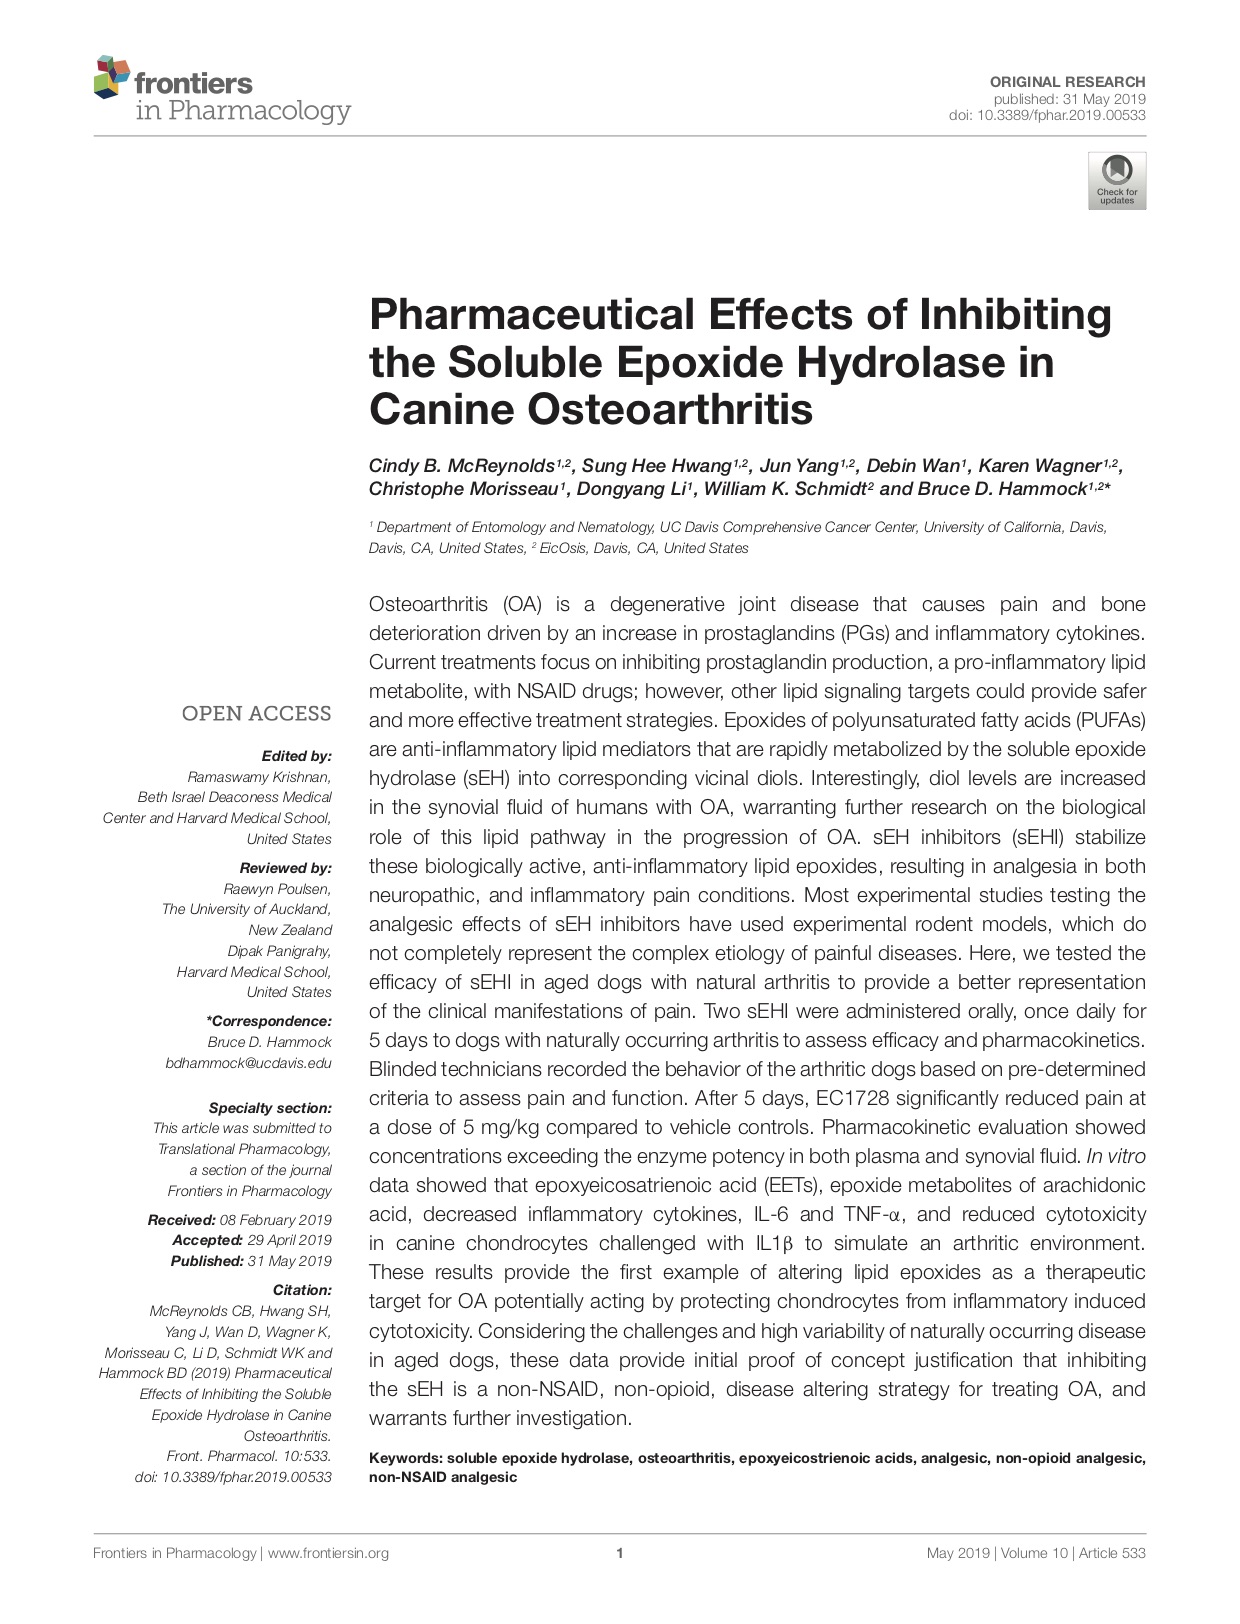 First page of scientific publication entitled "Pharmaceutical Effects of inhibiting the Soluble Epoxide Hydrolase in Canine Osteoarthritis"